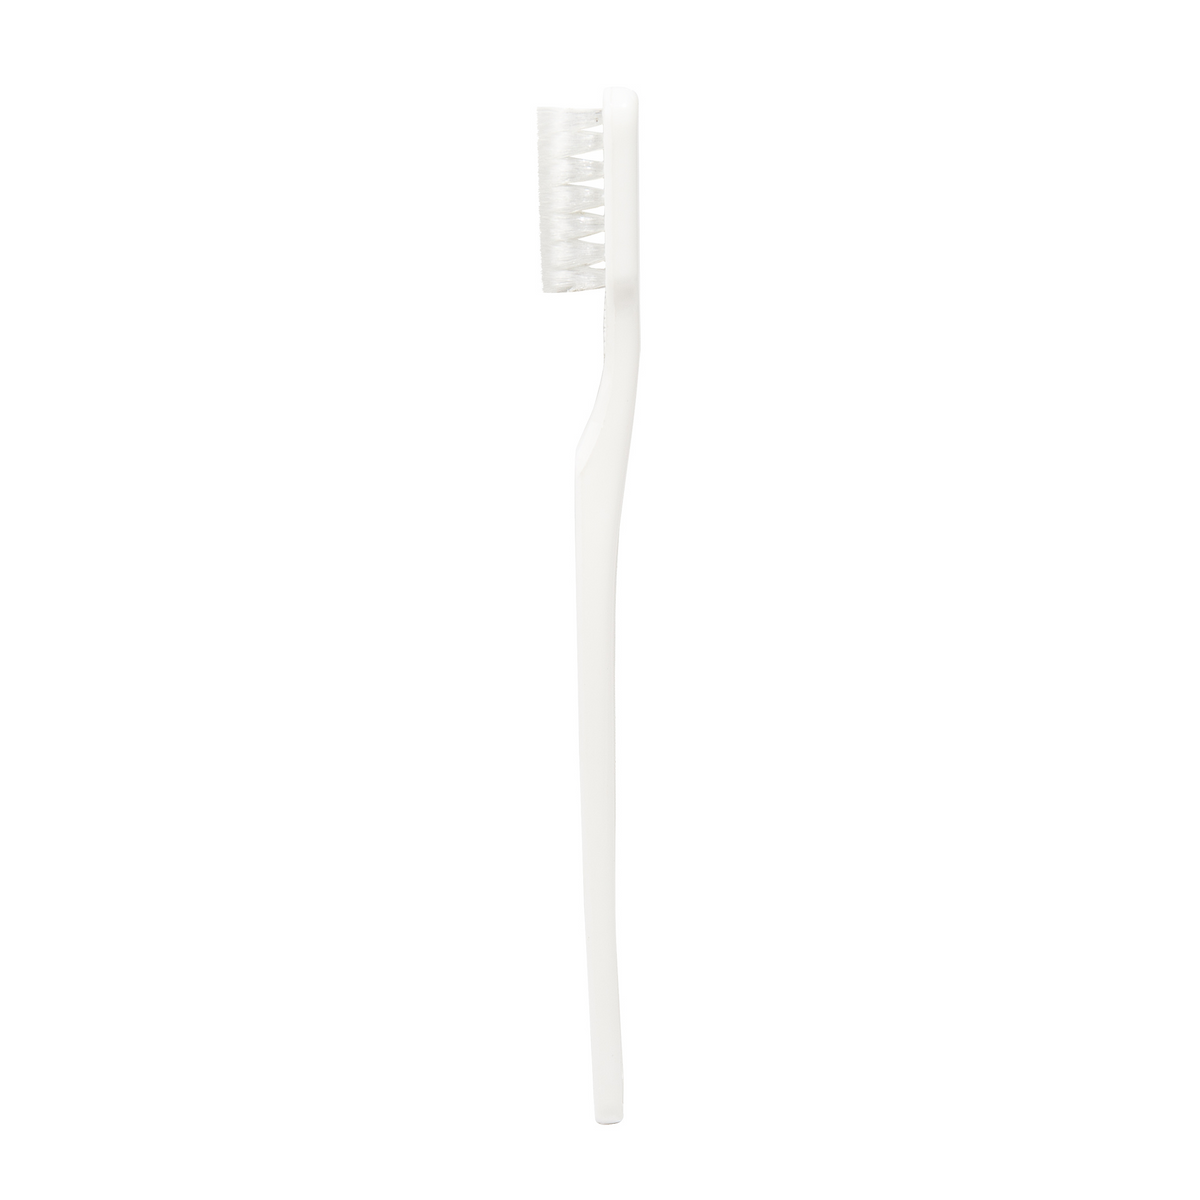 Primary Image of Curve Toothbrushes Soft-Clear Cap